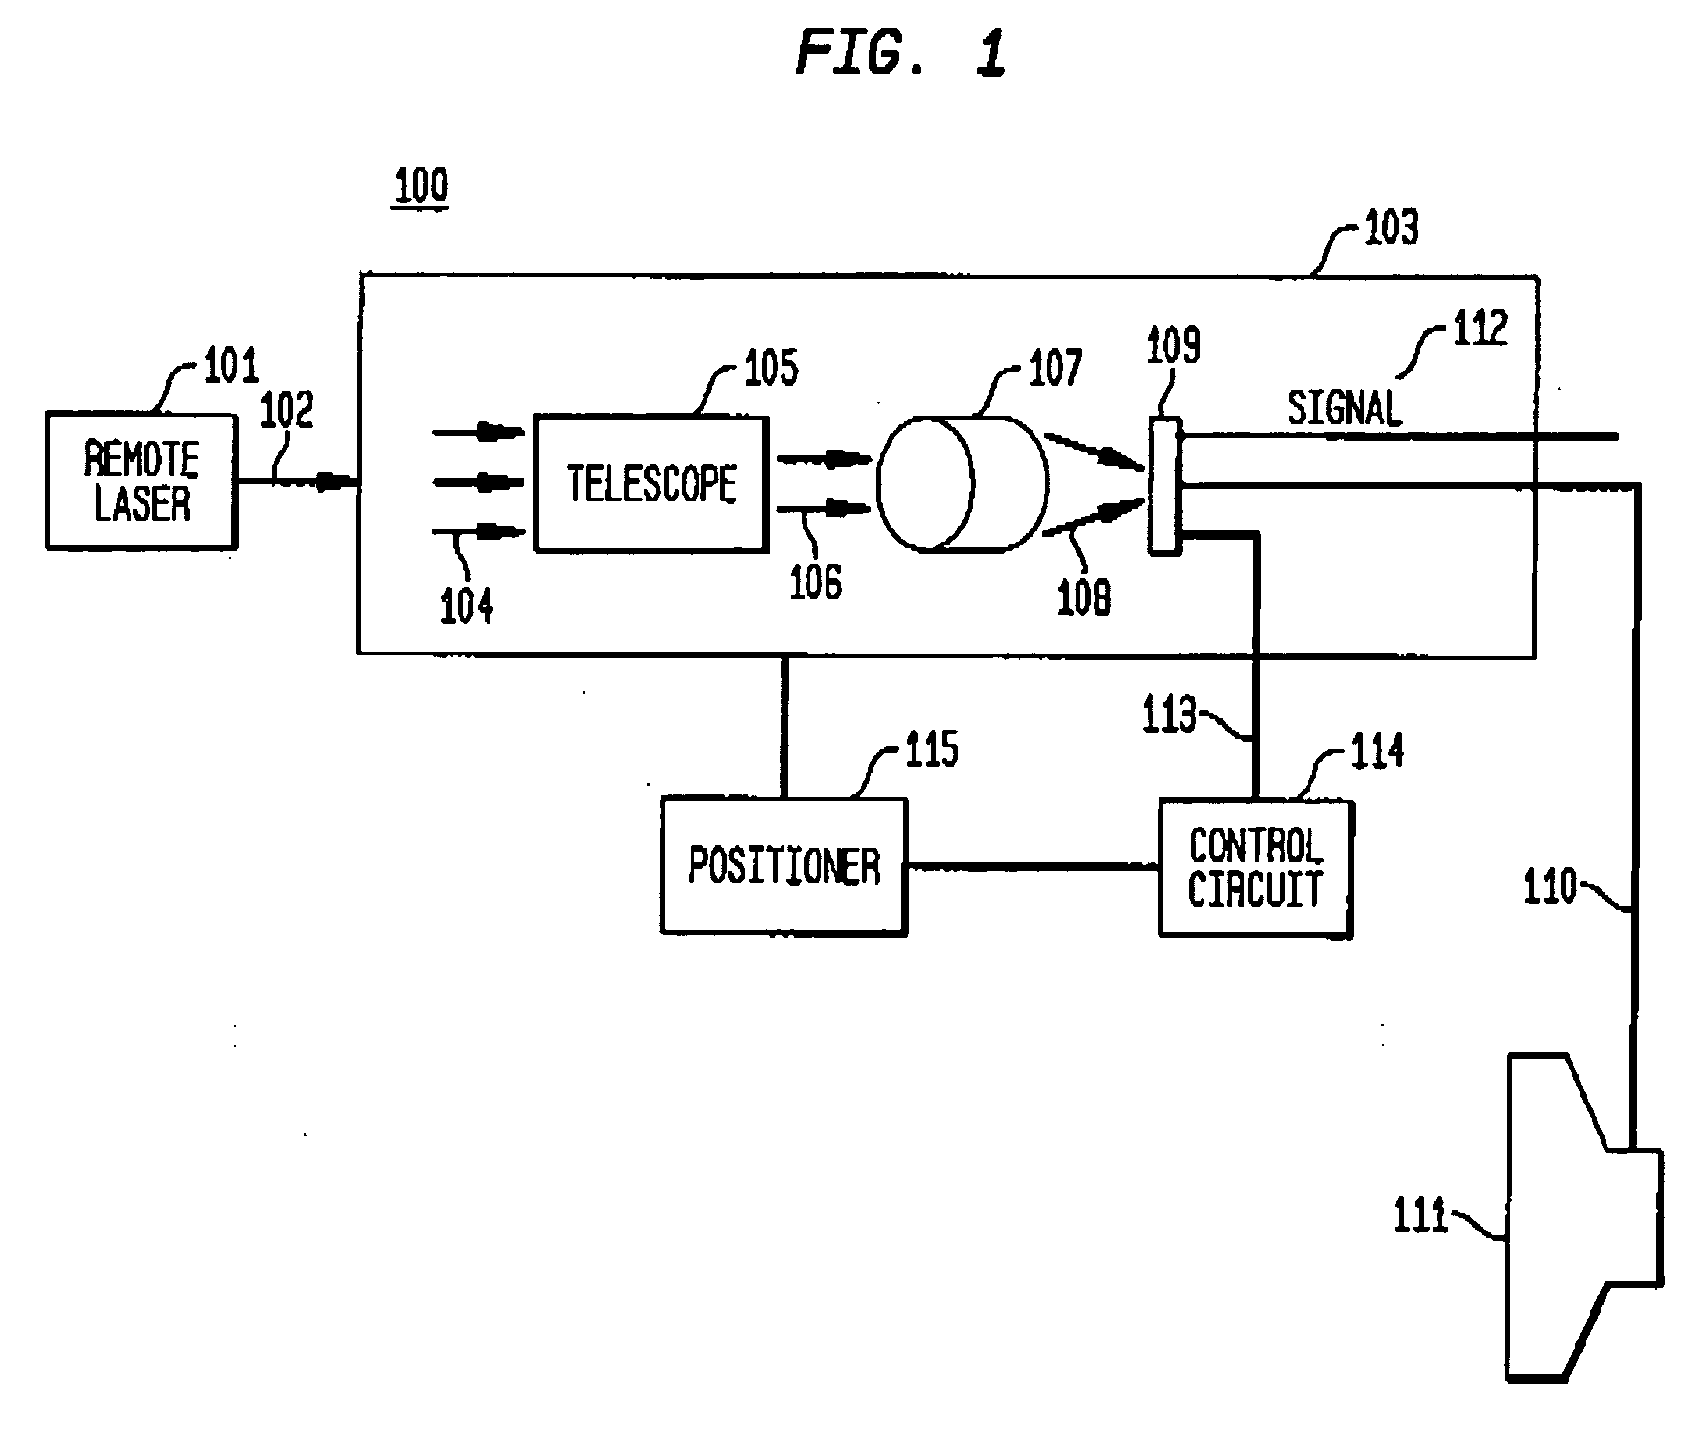 Optical receiver comprising a receiver photodetector integrated with an imaging array